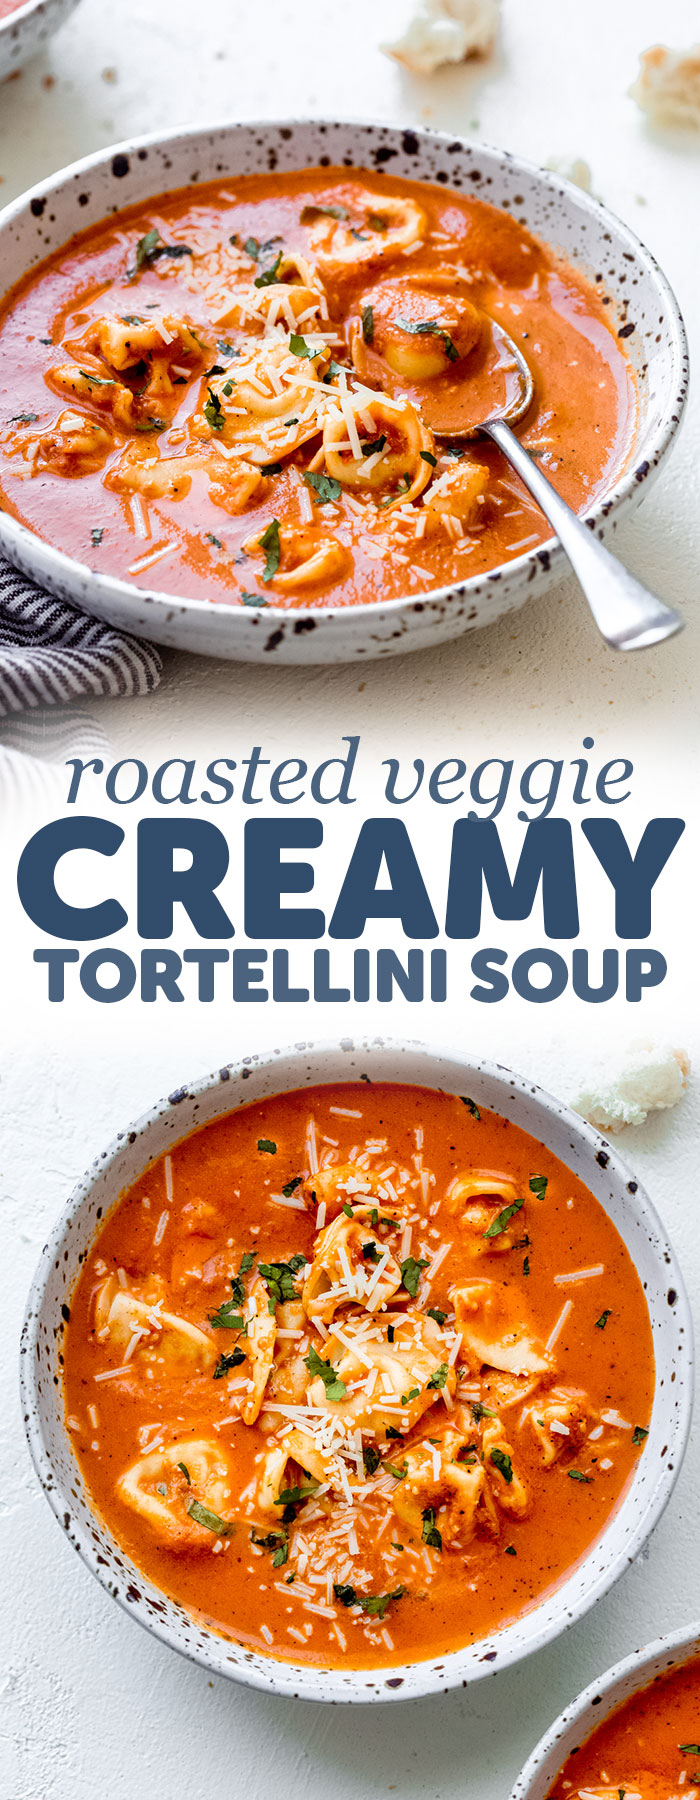 Roasted Veggie Creamy Tortellini Soup - Learn how to make the most veggie-packed creamy tortellini soup. Customize it by using veggie, cheese, or meat stuffed tortellini! #tortellinisoup #soup #roastedvegetablesoup #tortellinisoup | Littlespicejar.com